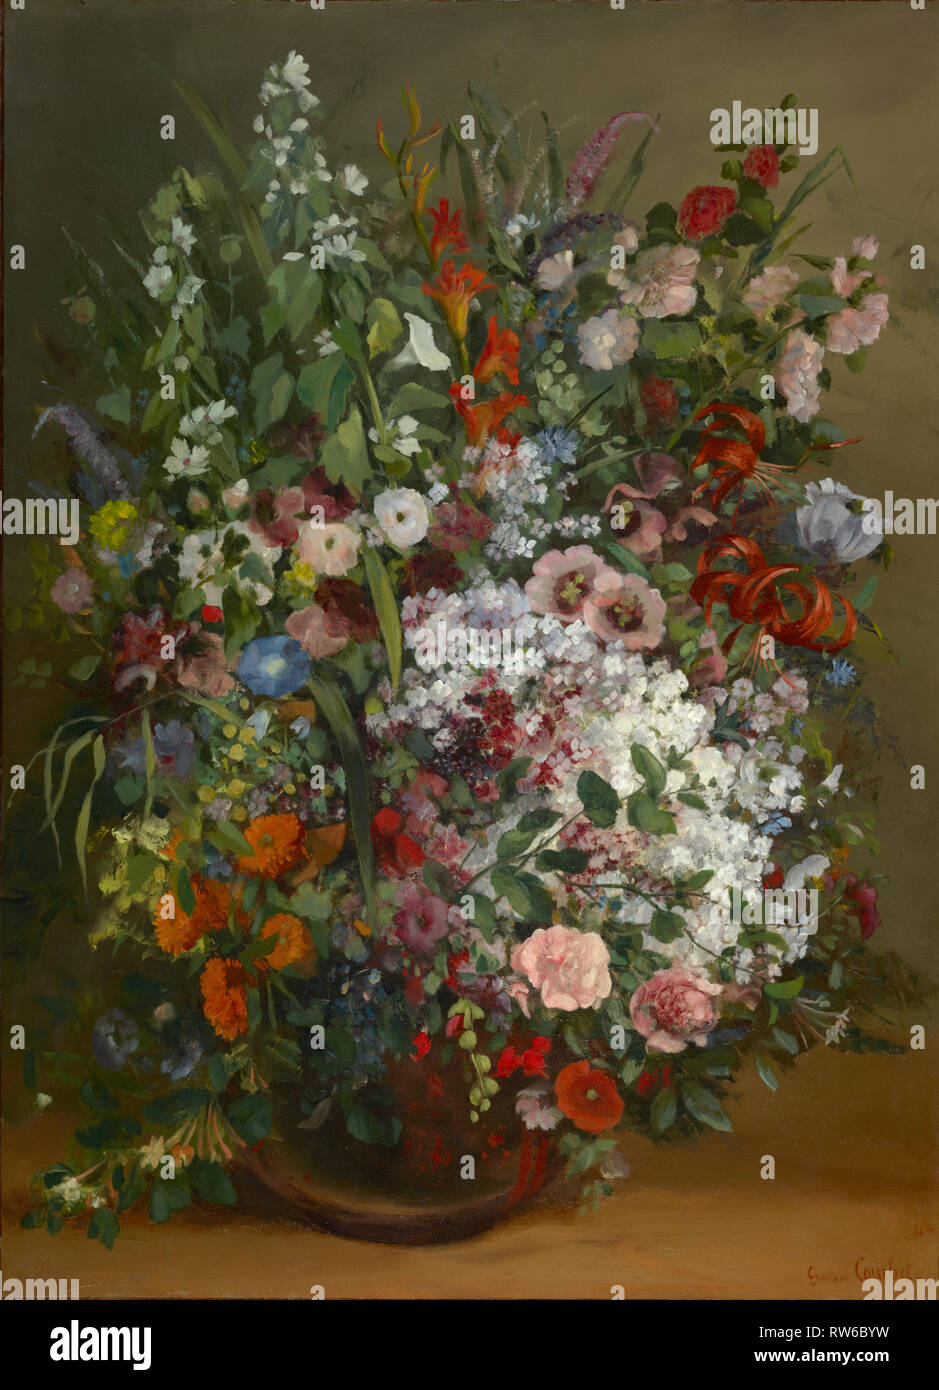 Bouquet of Flowers in a Vase; Gustave Courbet (French, 1819 - 1877); 1862; Oil on canvas; 100.3 x 73.3 cm (39 1/2 x 28 7/8 in.); 85.PA.168Digital imag Stock Photo